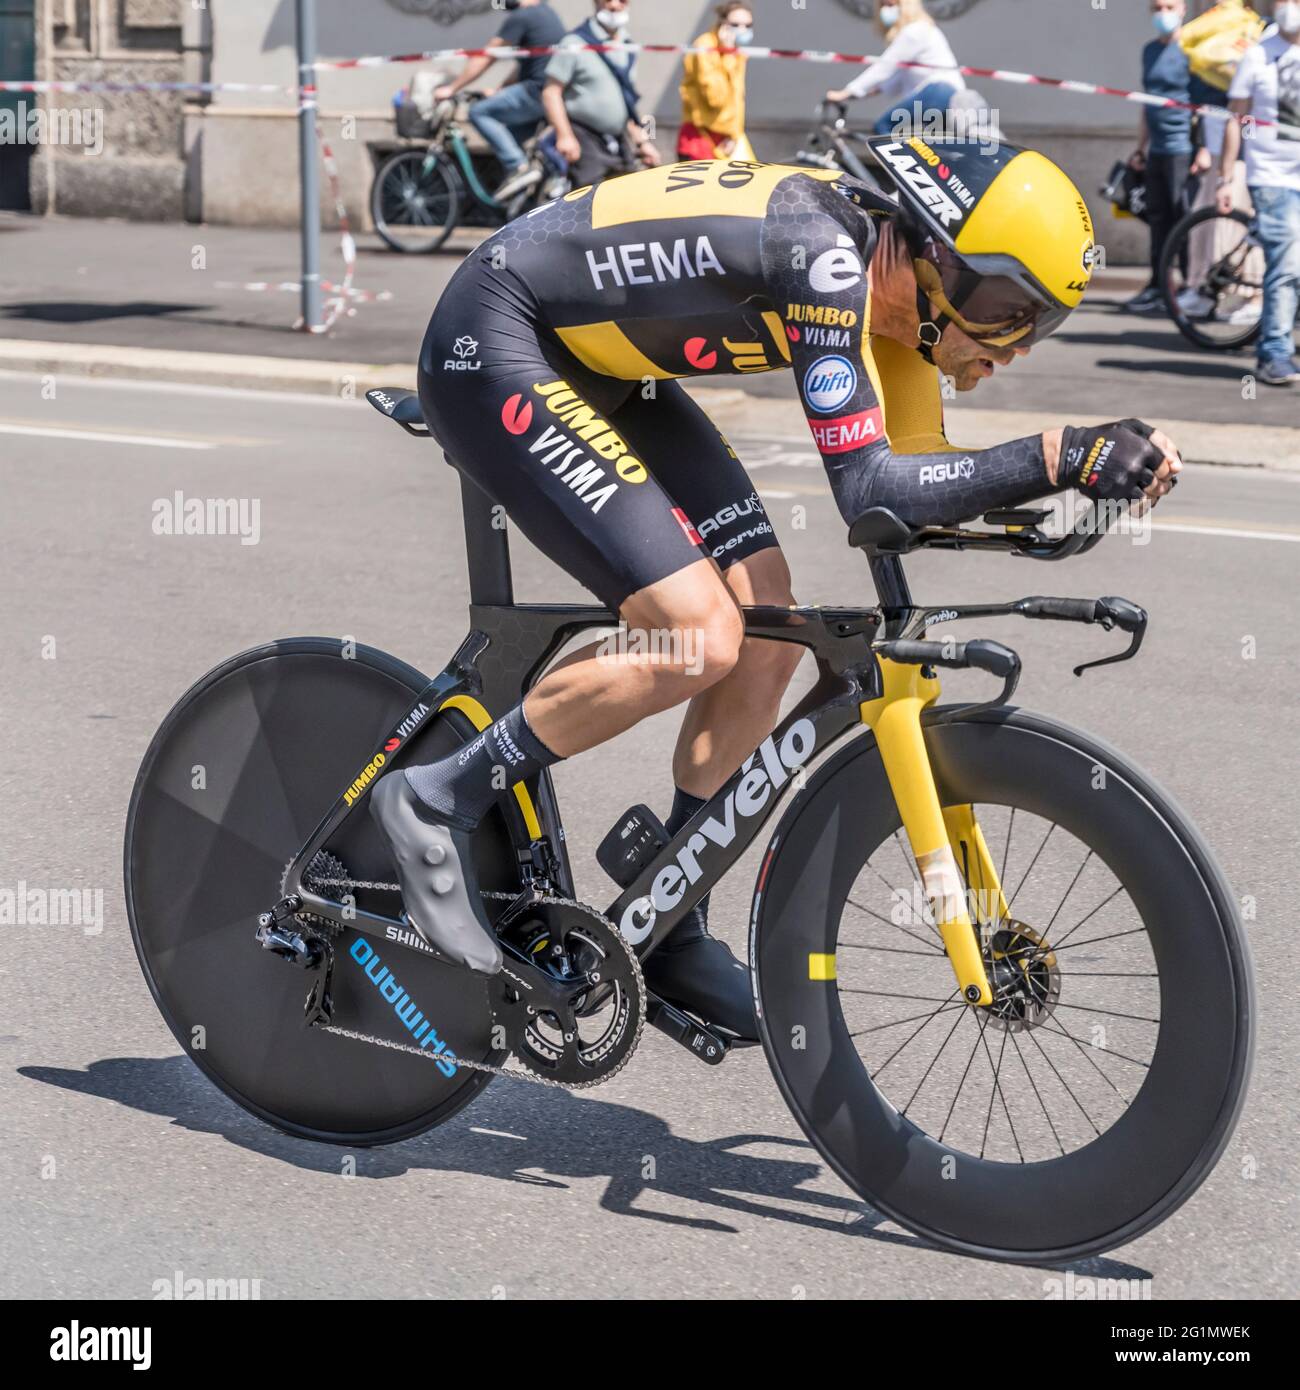 MILAN, ITALY - MAY 30: last stage of Giro 2021, Paul Martens competitor of  Jumbo-Visma Team at high speed during individual time trial in city street  Stock Photo - Alamy